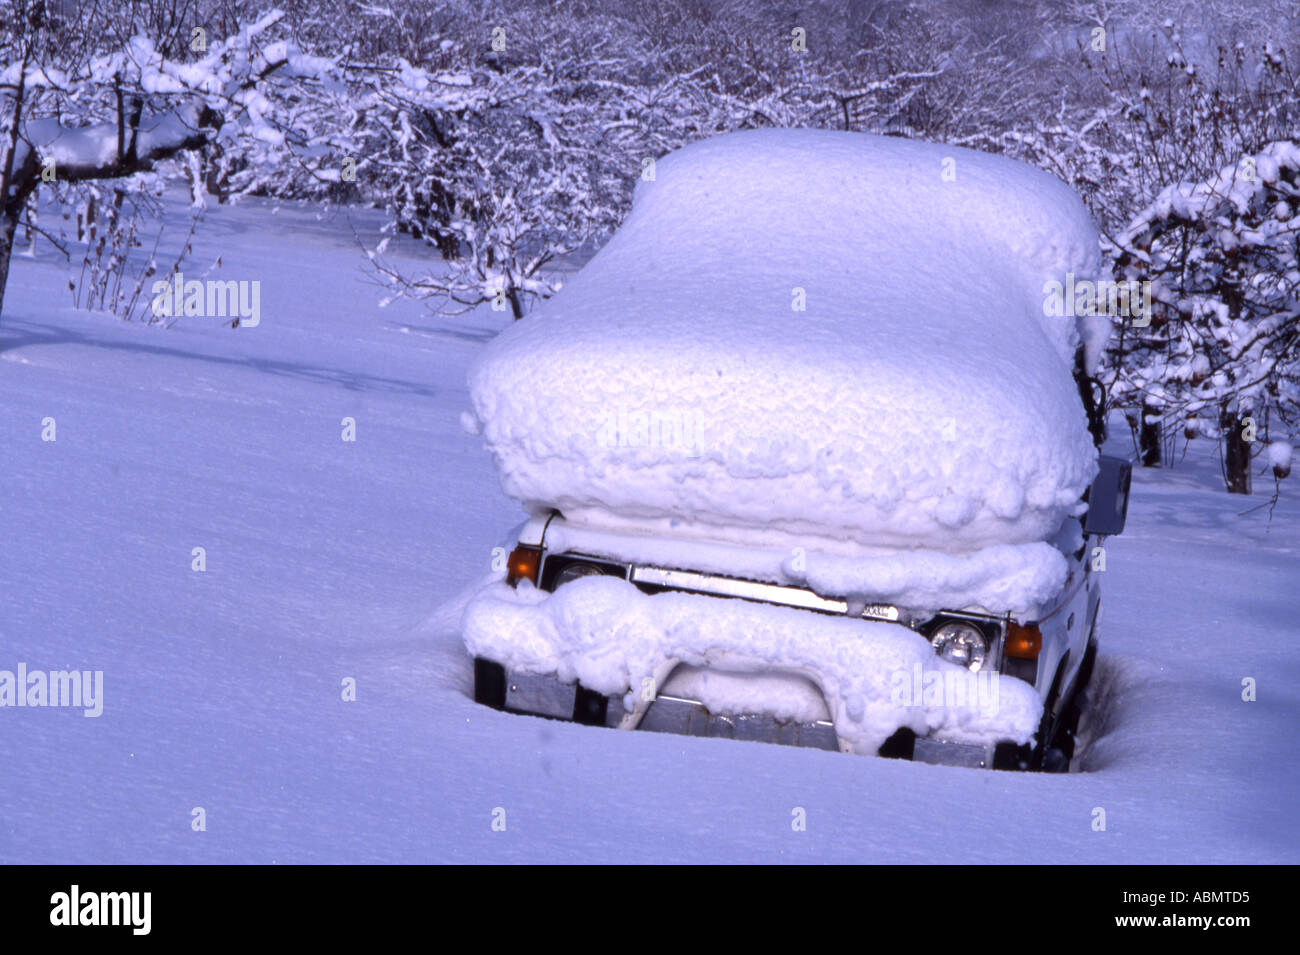 Blizzard conditions leave car covered in snow Stock Photo